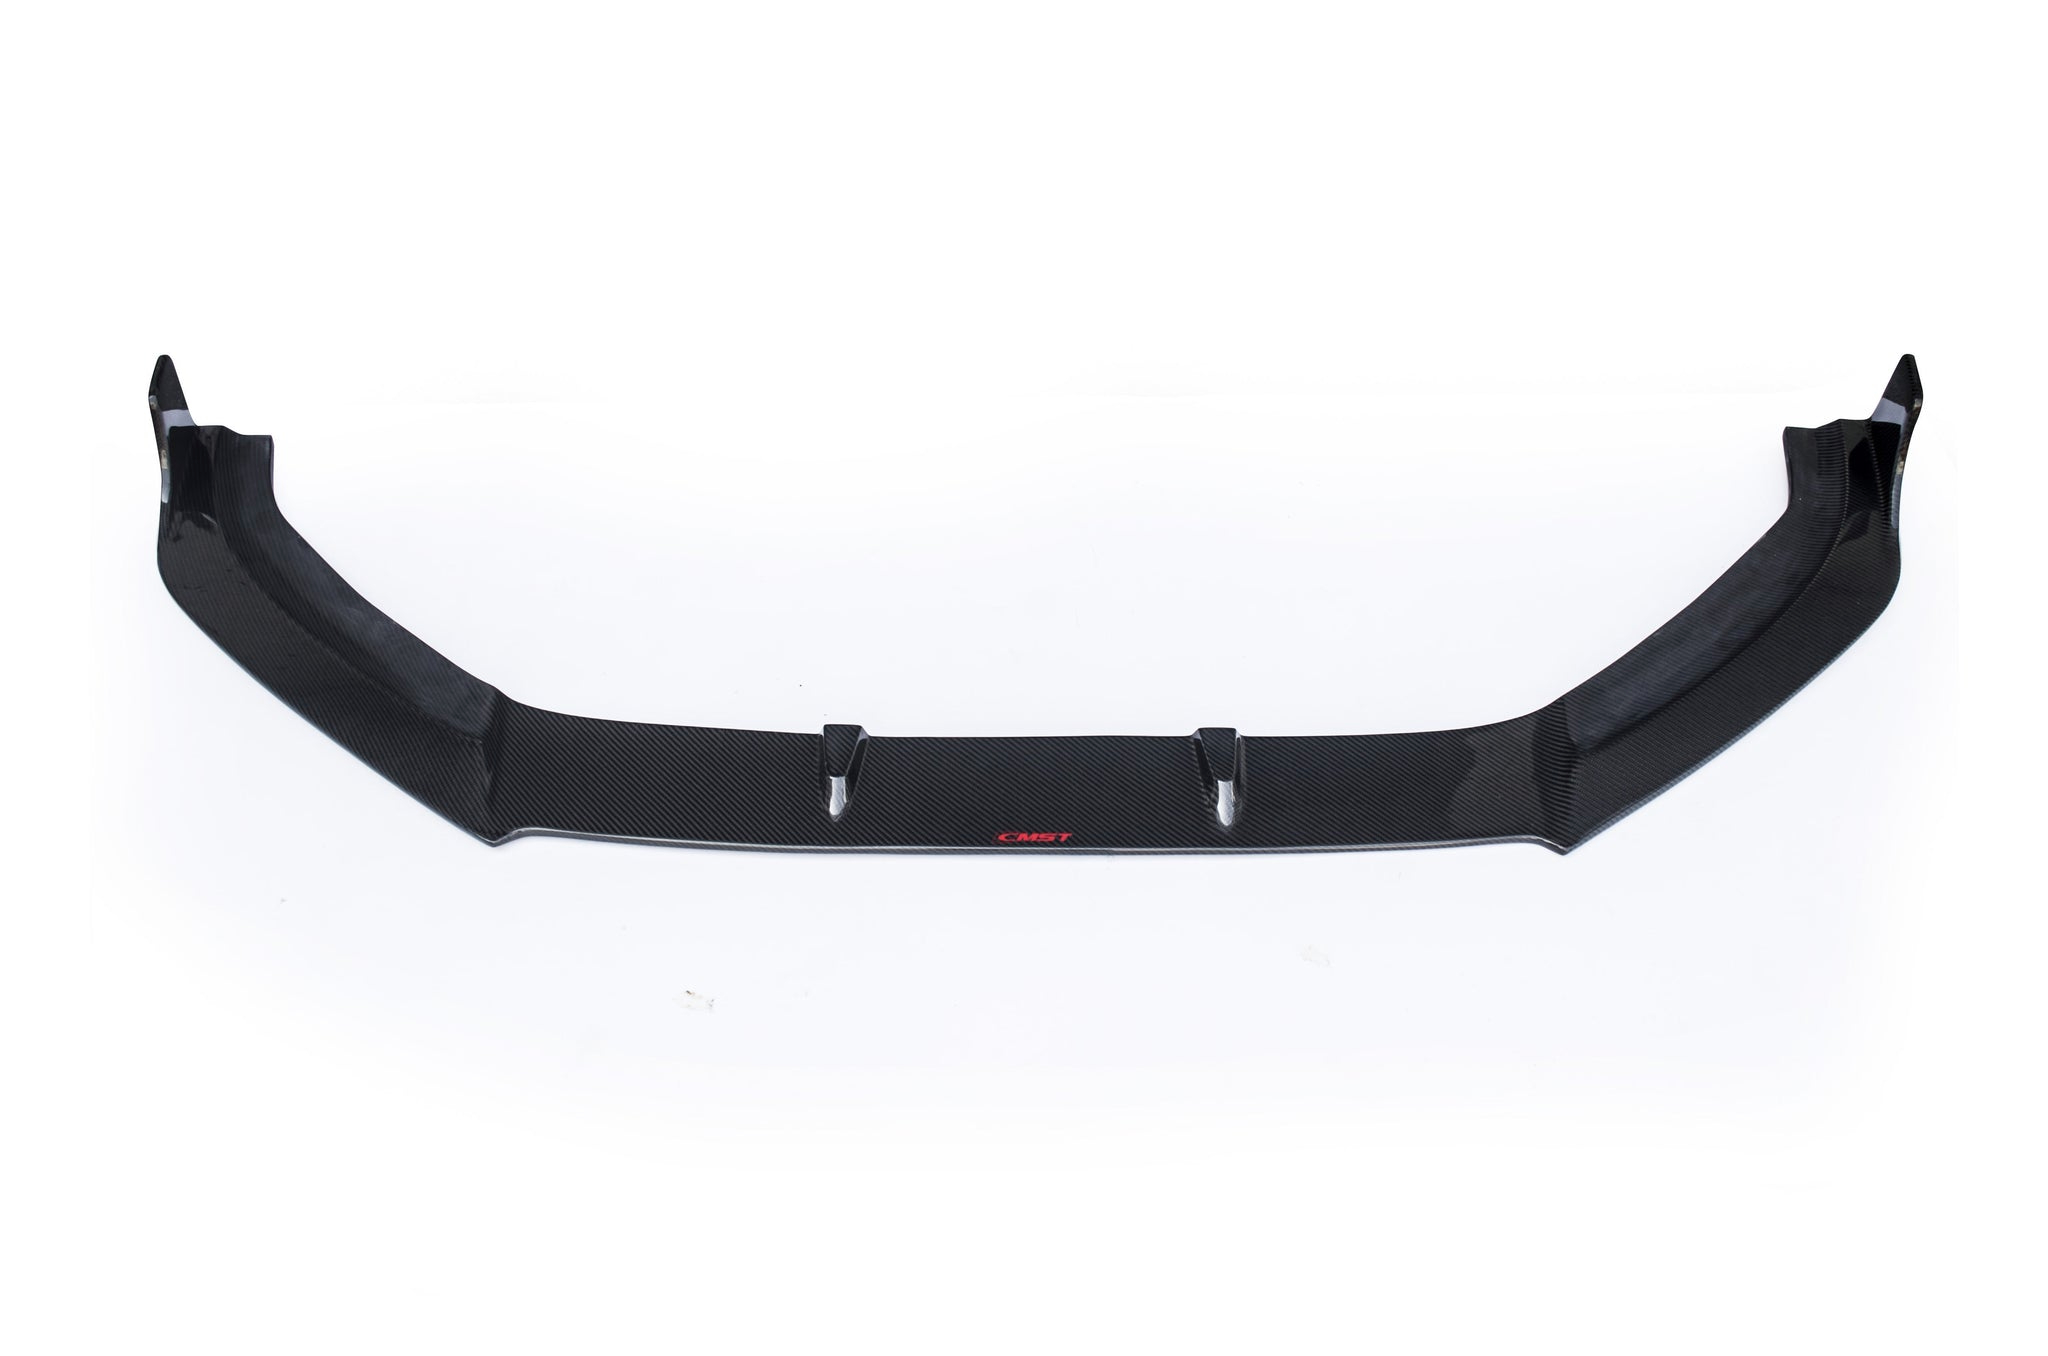 Check our price and buy CMST Carbon Fiber Body Kit set for Audi A3/S3!